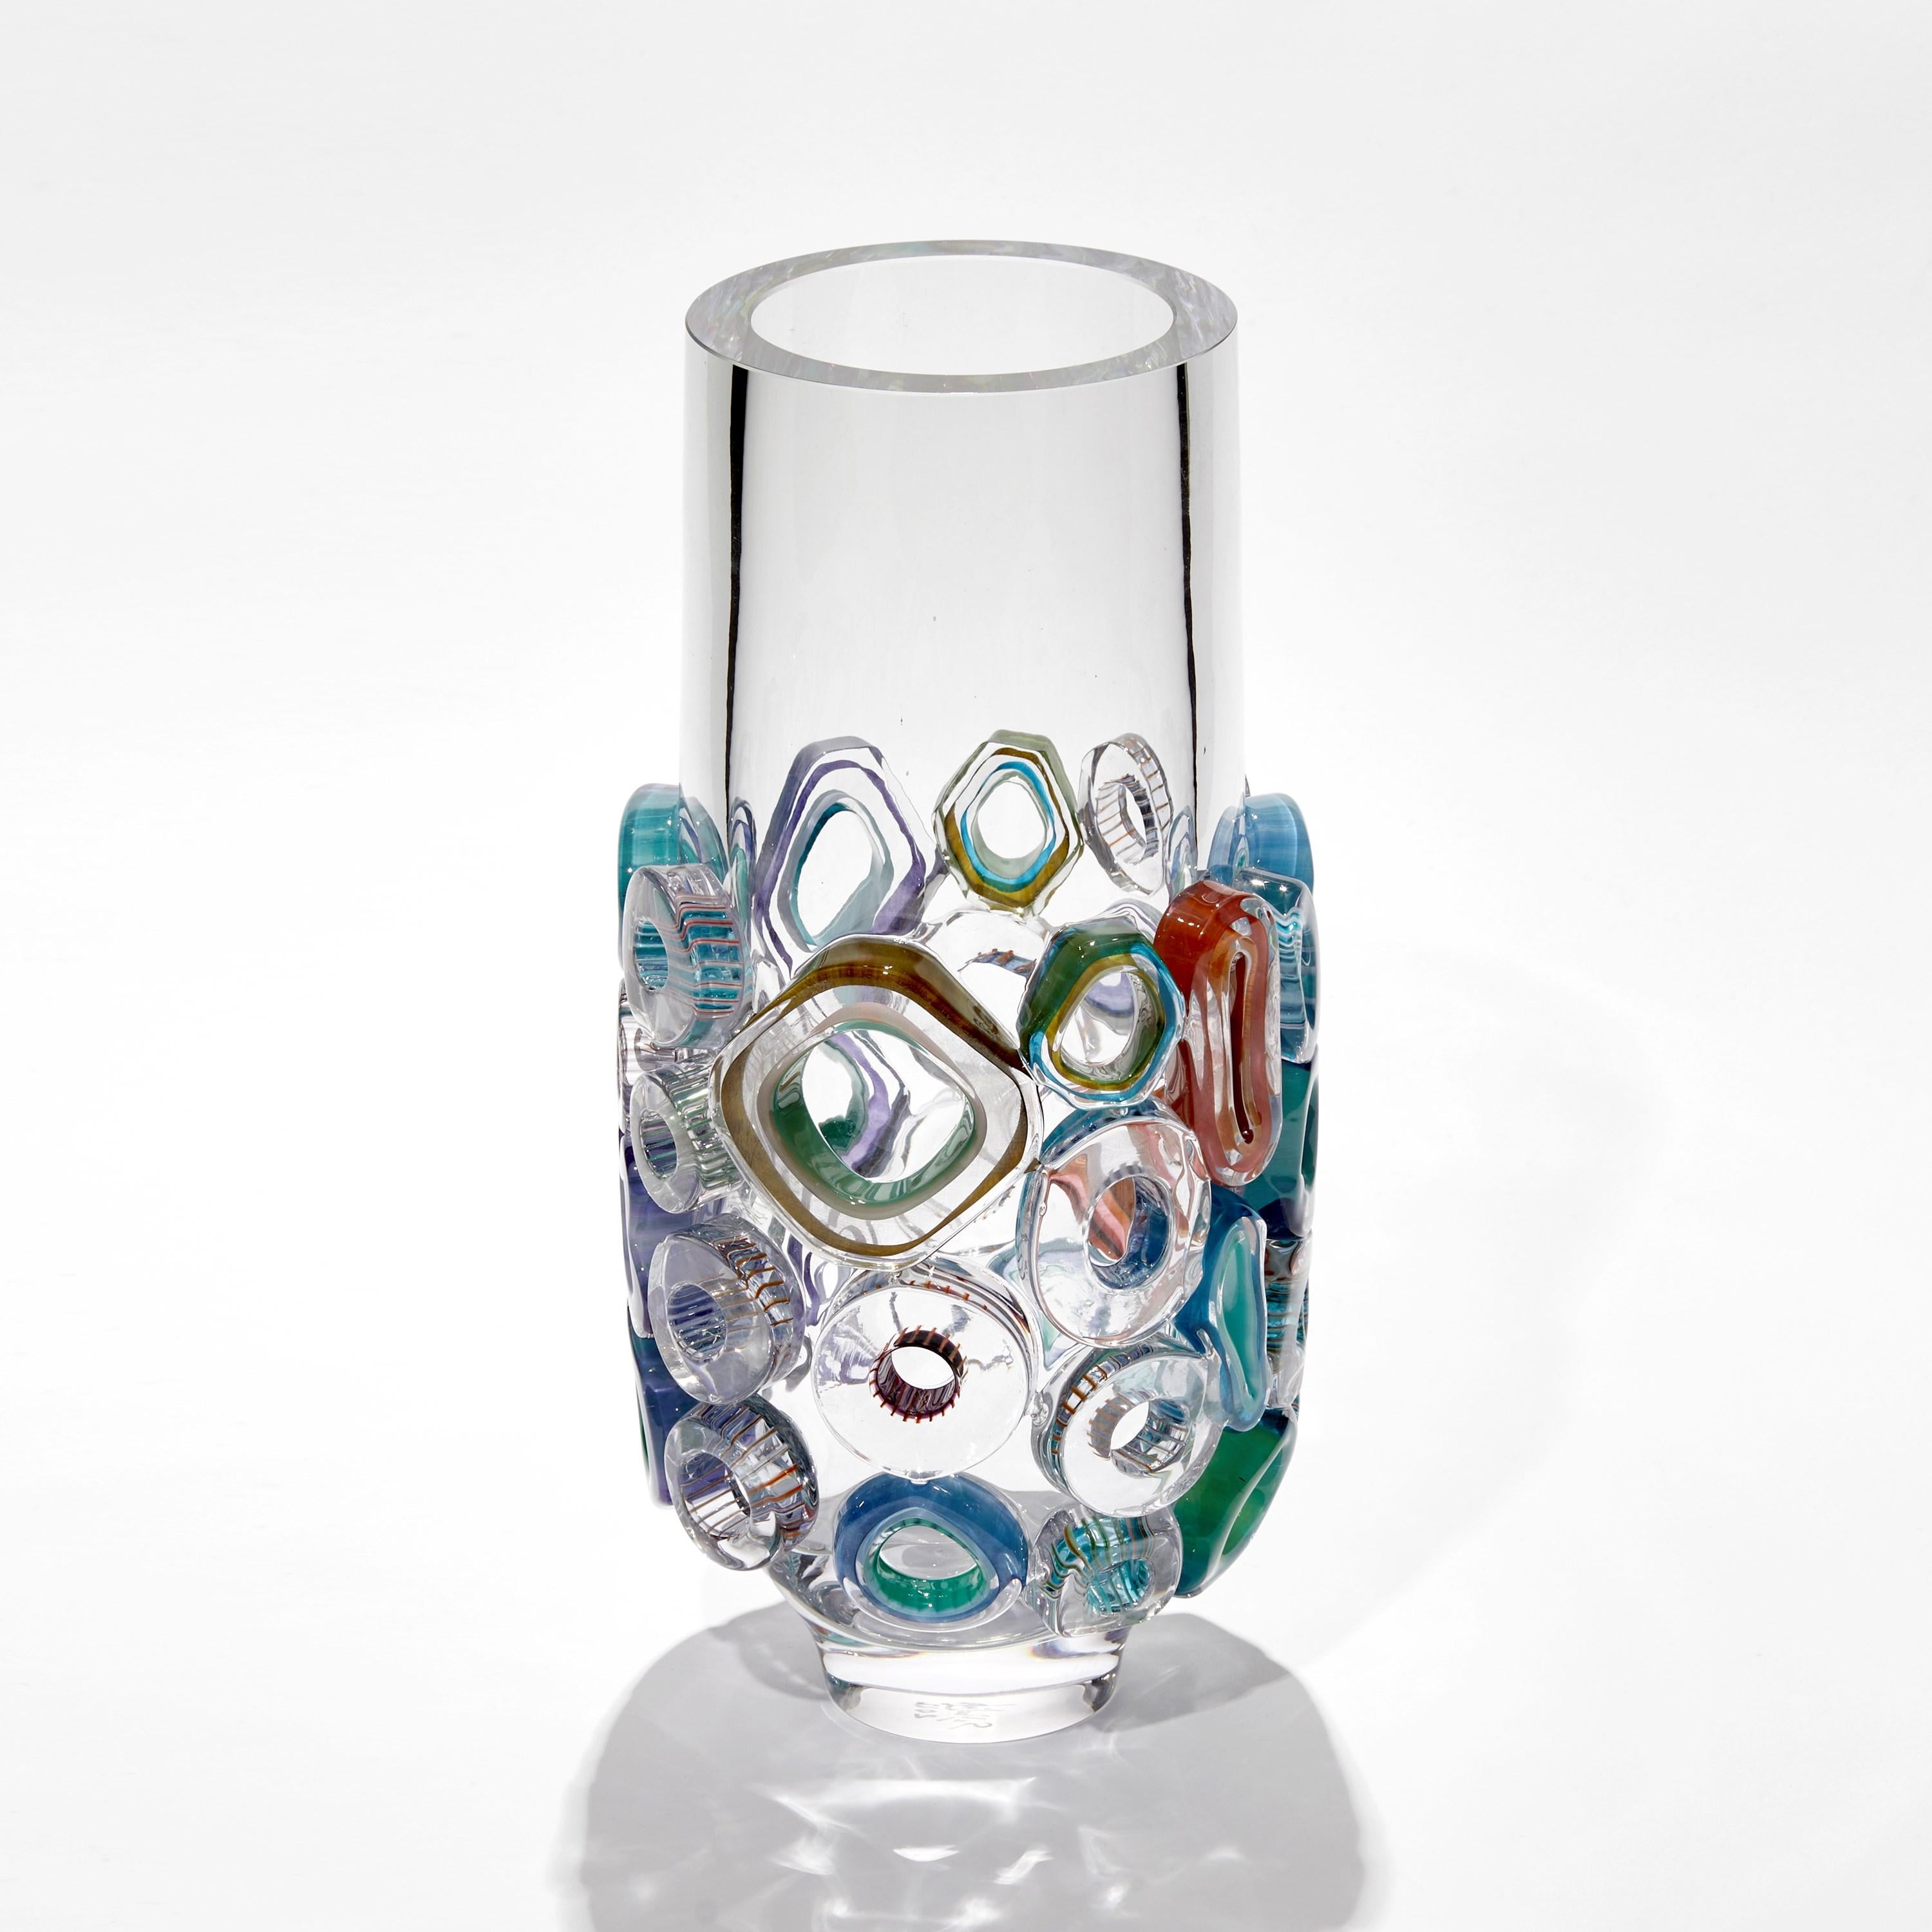 ‘Bright Field Neutral Grey’ is a unique sculptural glass vase by the German artist, Sabine Lintzen.

The initial inner form is free-blown and adorned with various individually shaped murrini. The top edge had been cut and polished to create a